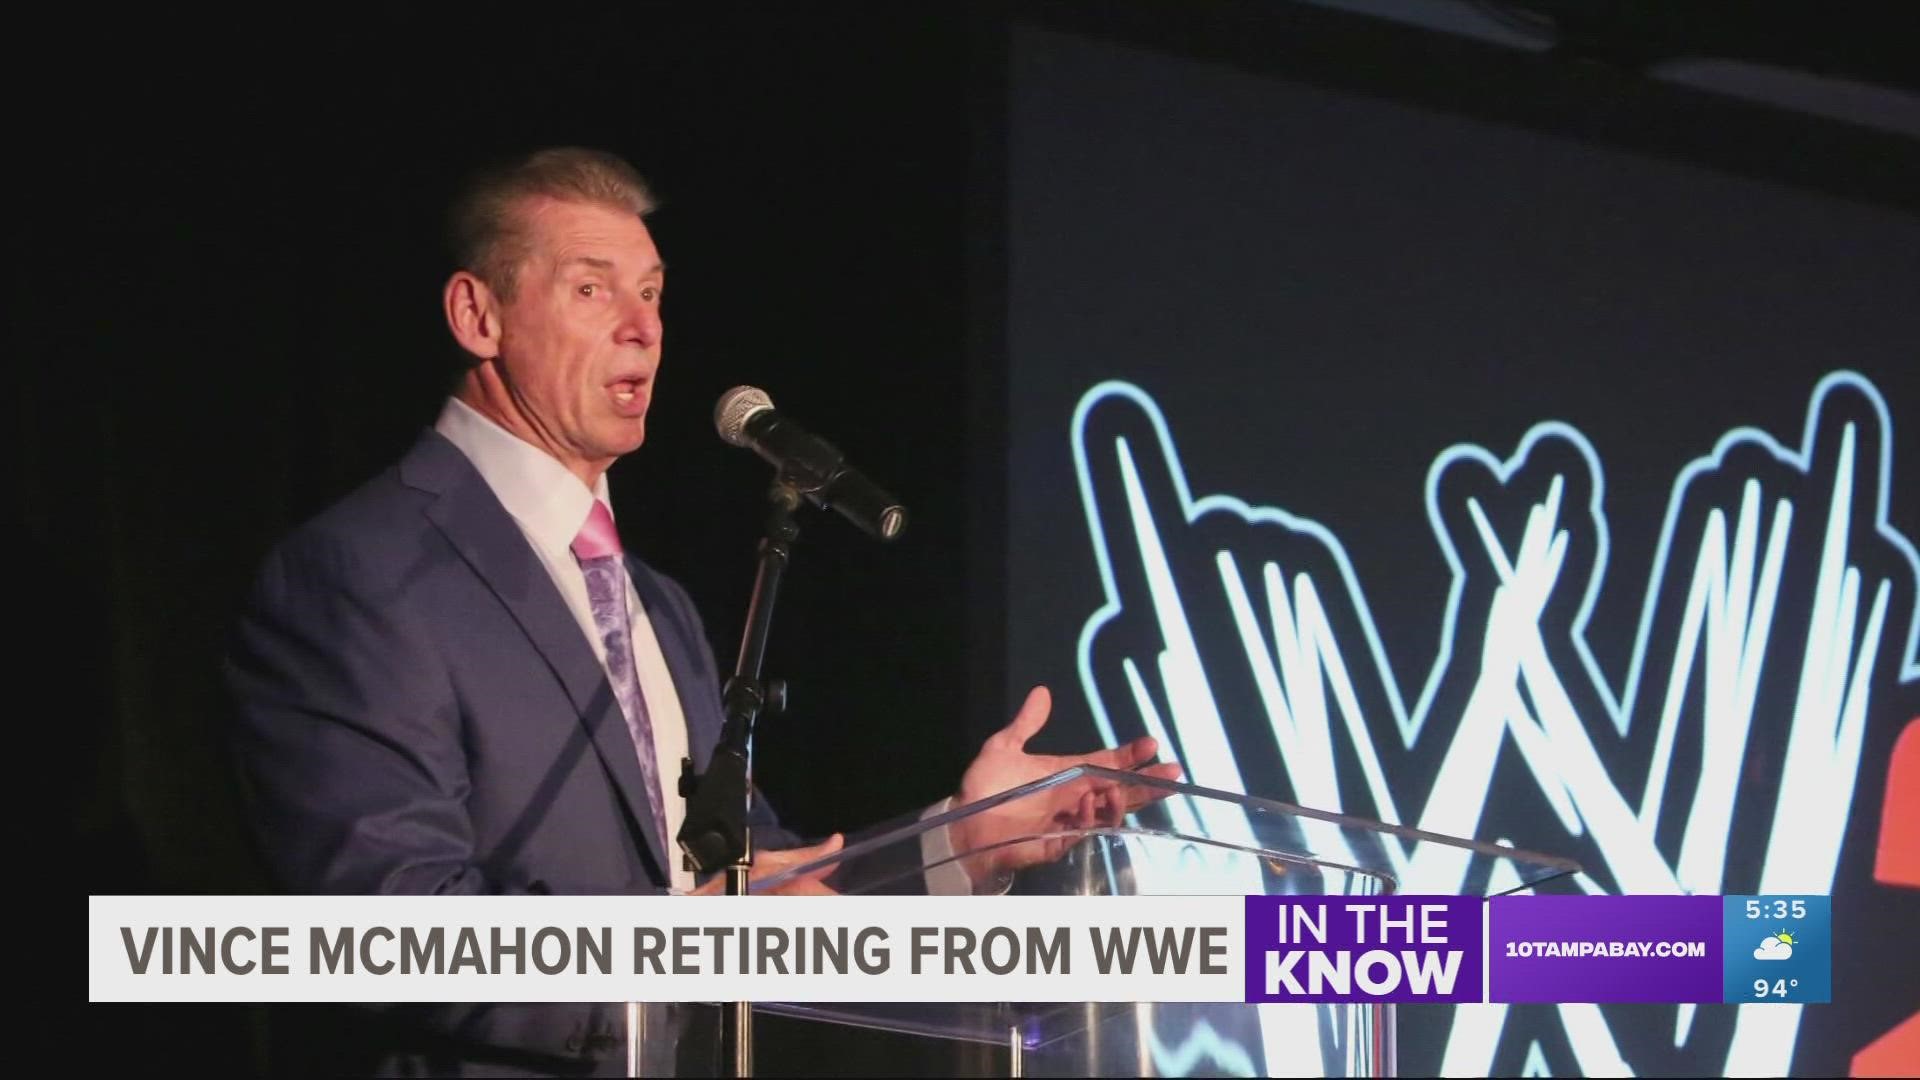 The Wall Street Journal reported McMahon paid more than $12 million over the past 16 years to suppress allegations of sexual misconduct from former employees.